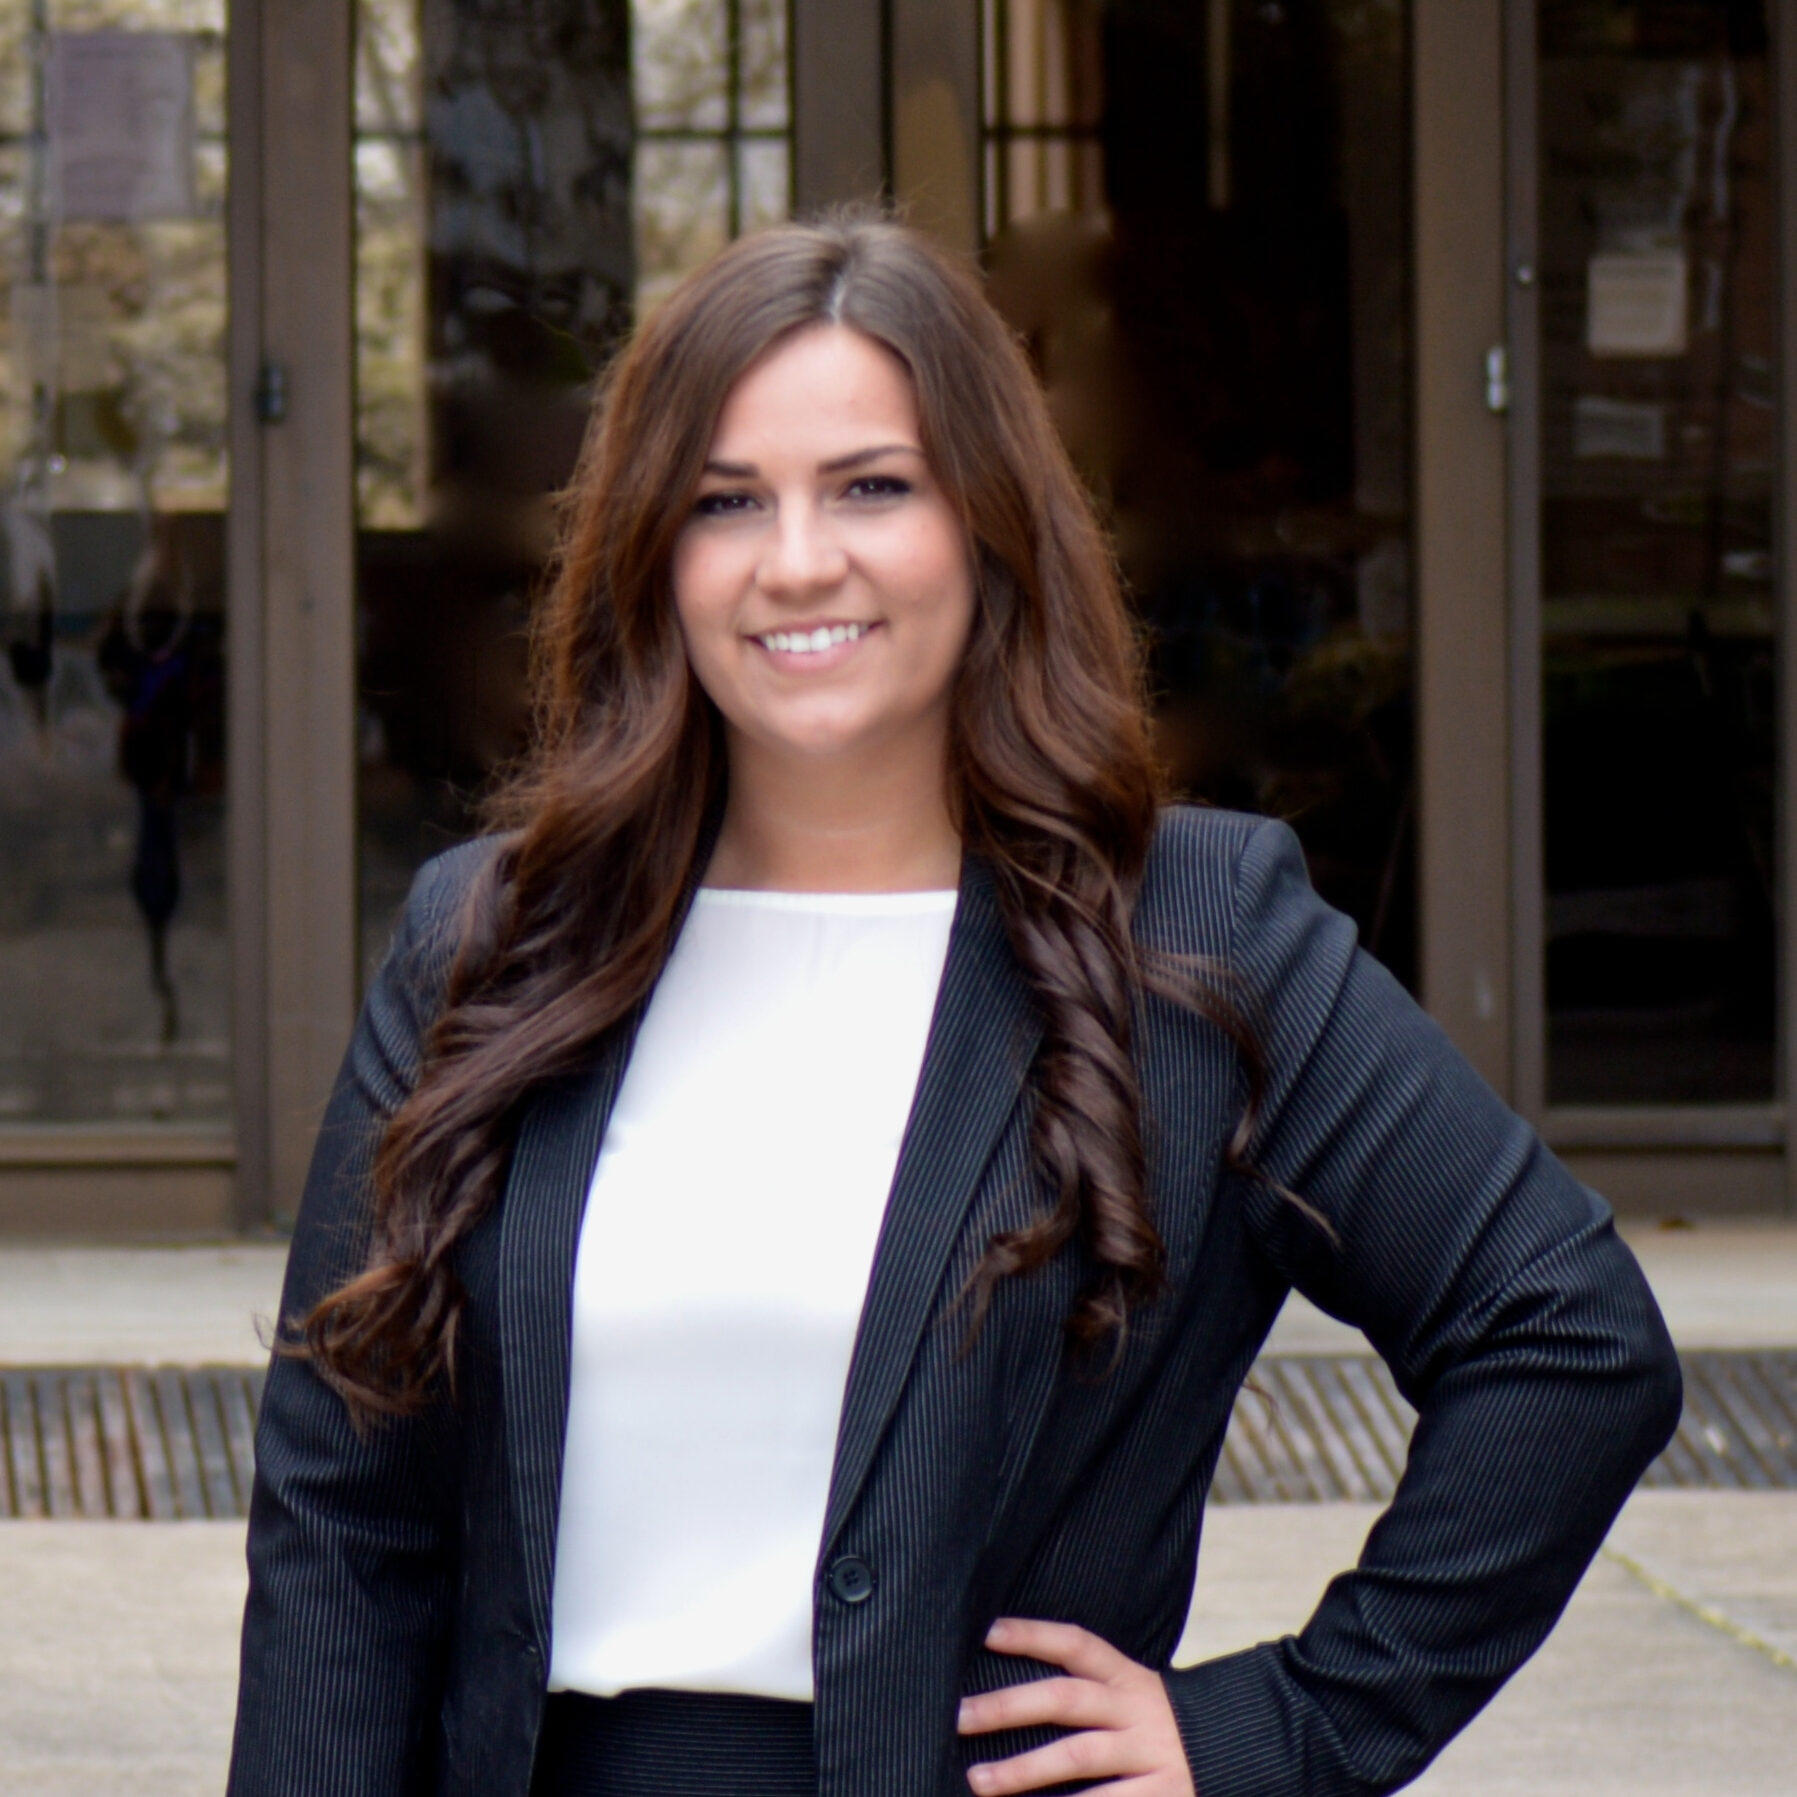 Courtney R. Todd is a 2014 graduate of the University of South Carolina Honors College and a 2017 cum laude graduate of the University of South Carolina School of Law. During law school, she spent significant time focusing in the area of family law.